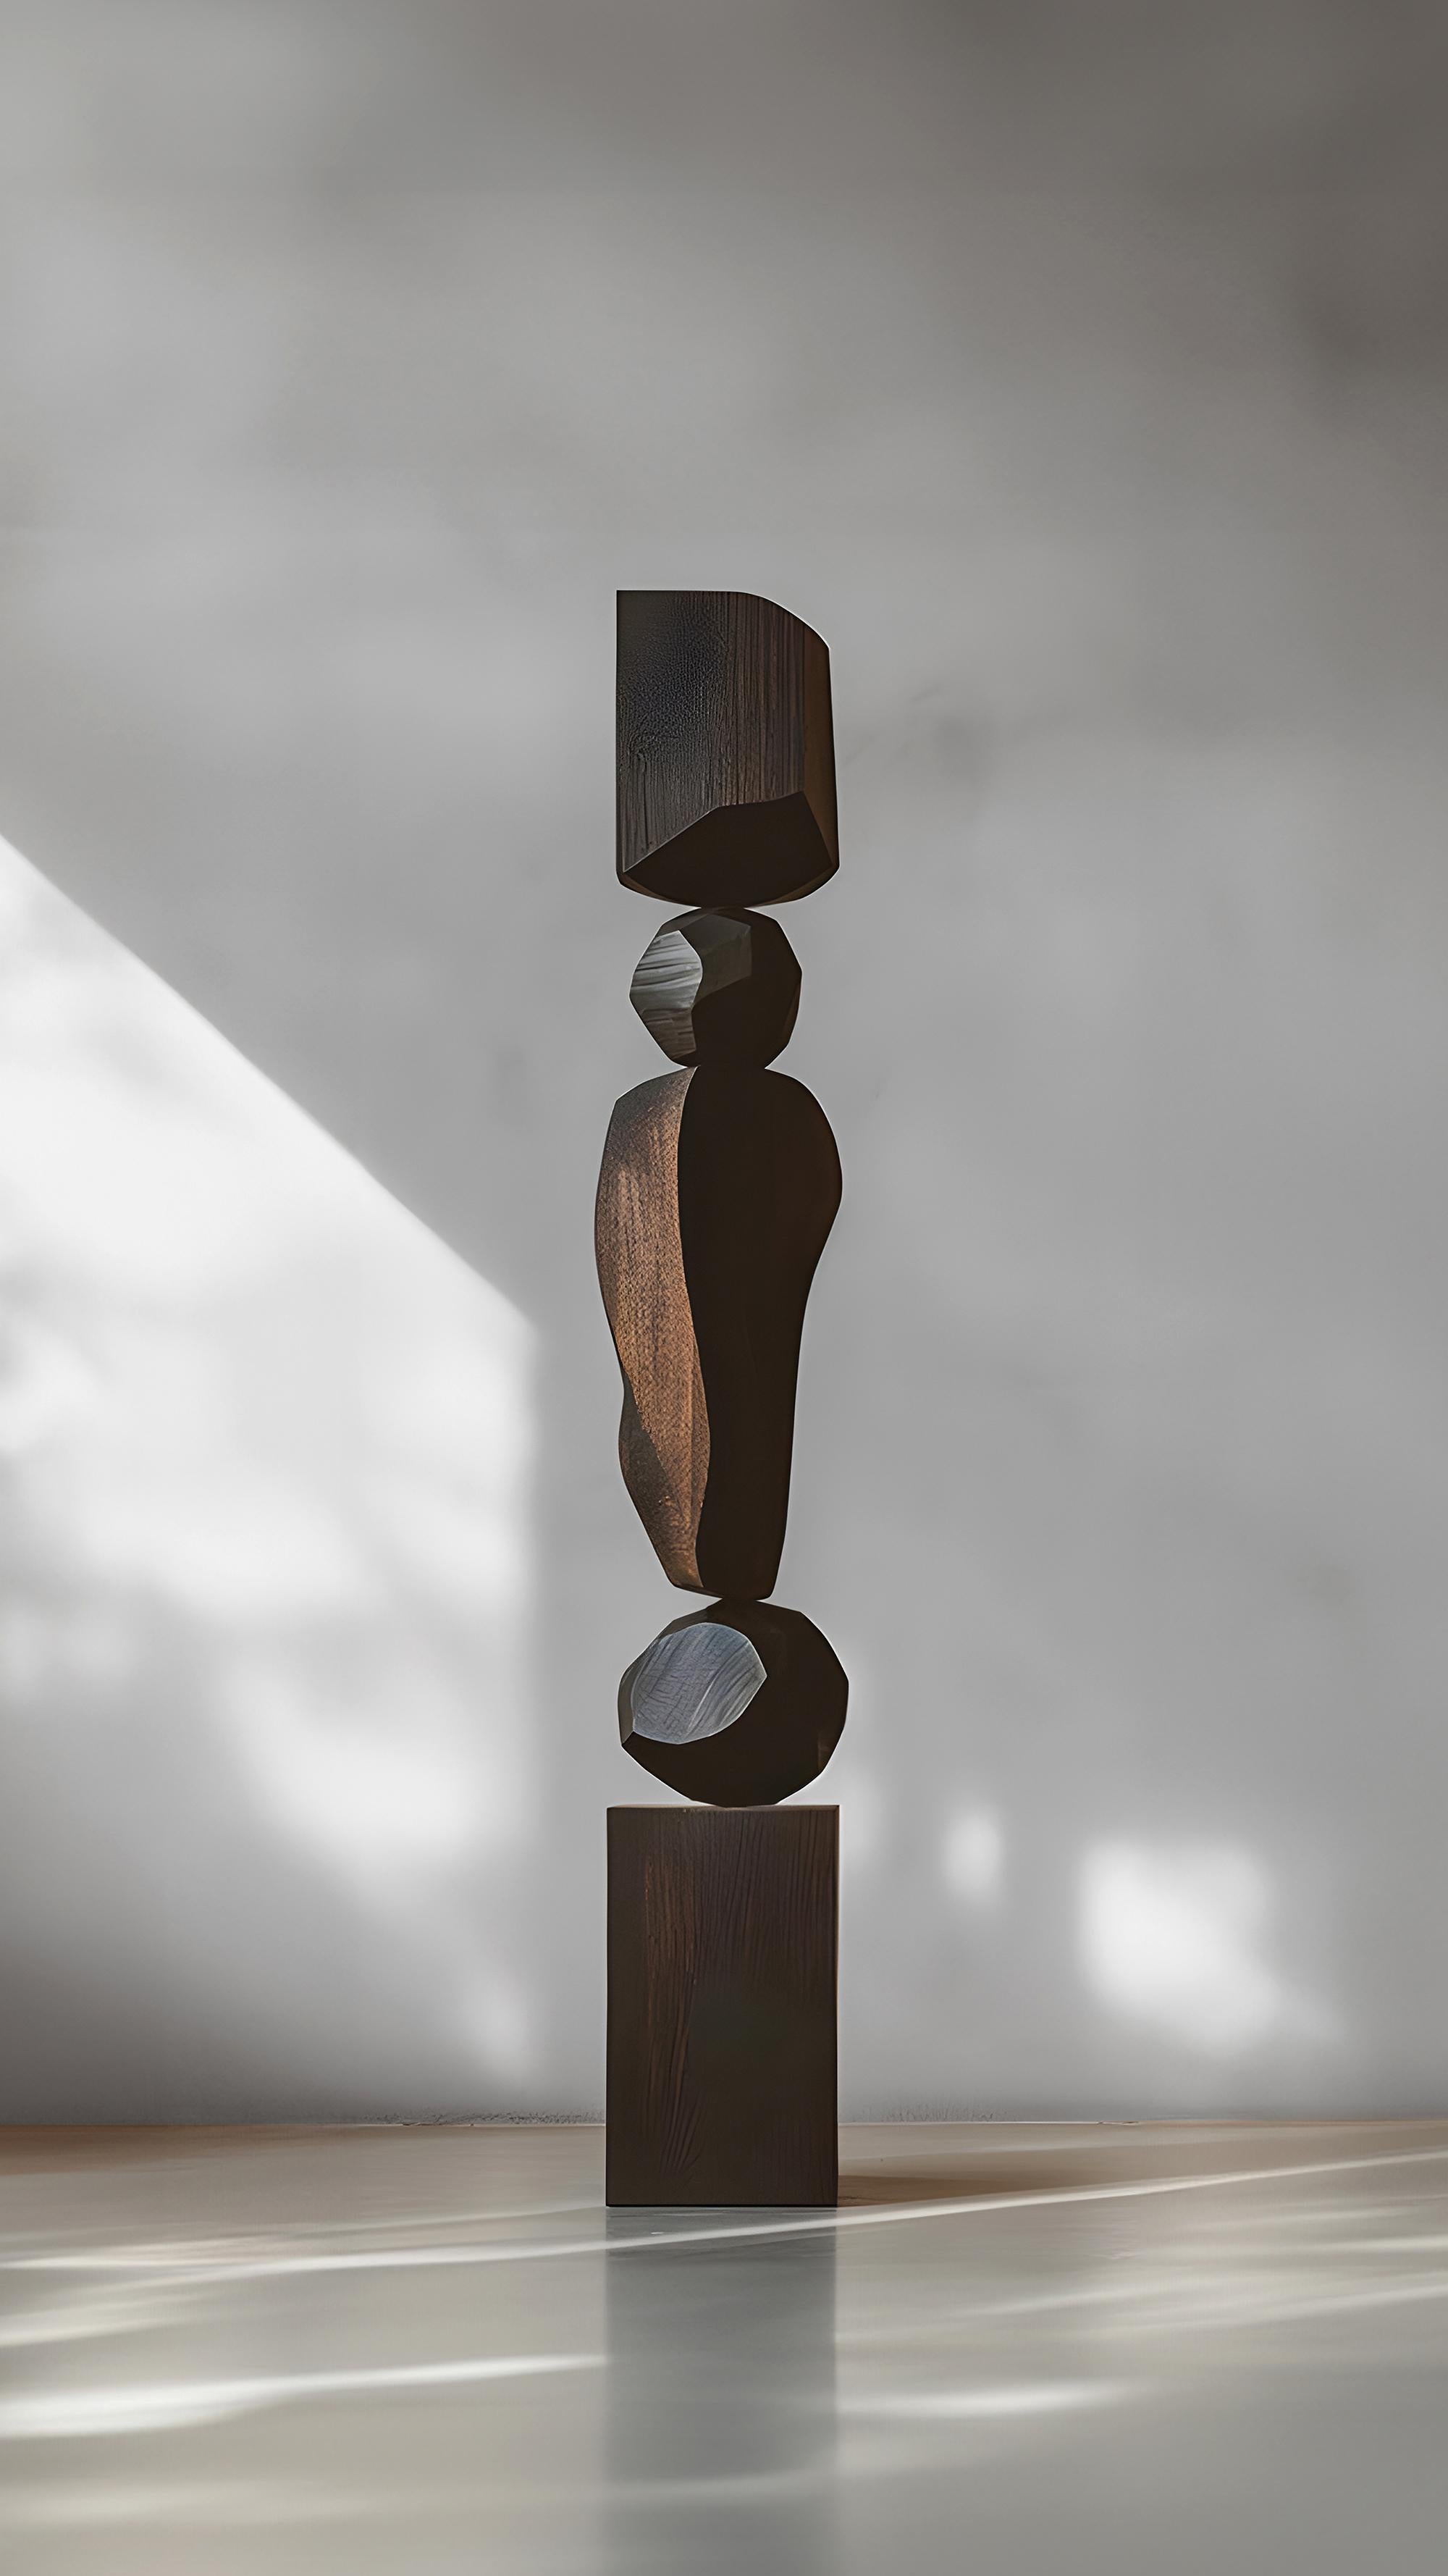 Still Stand No102, The Dark Elegance of Abstract Burned Oak by Escalona
_
Joel Escalona's wooden standing sculptures are objects of raw beauty and serene grace. Each one is a testament to the power of the material, with smooth curves that flow into